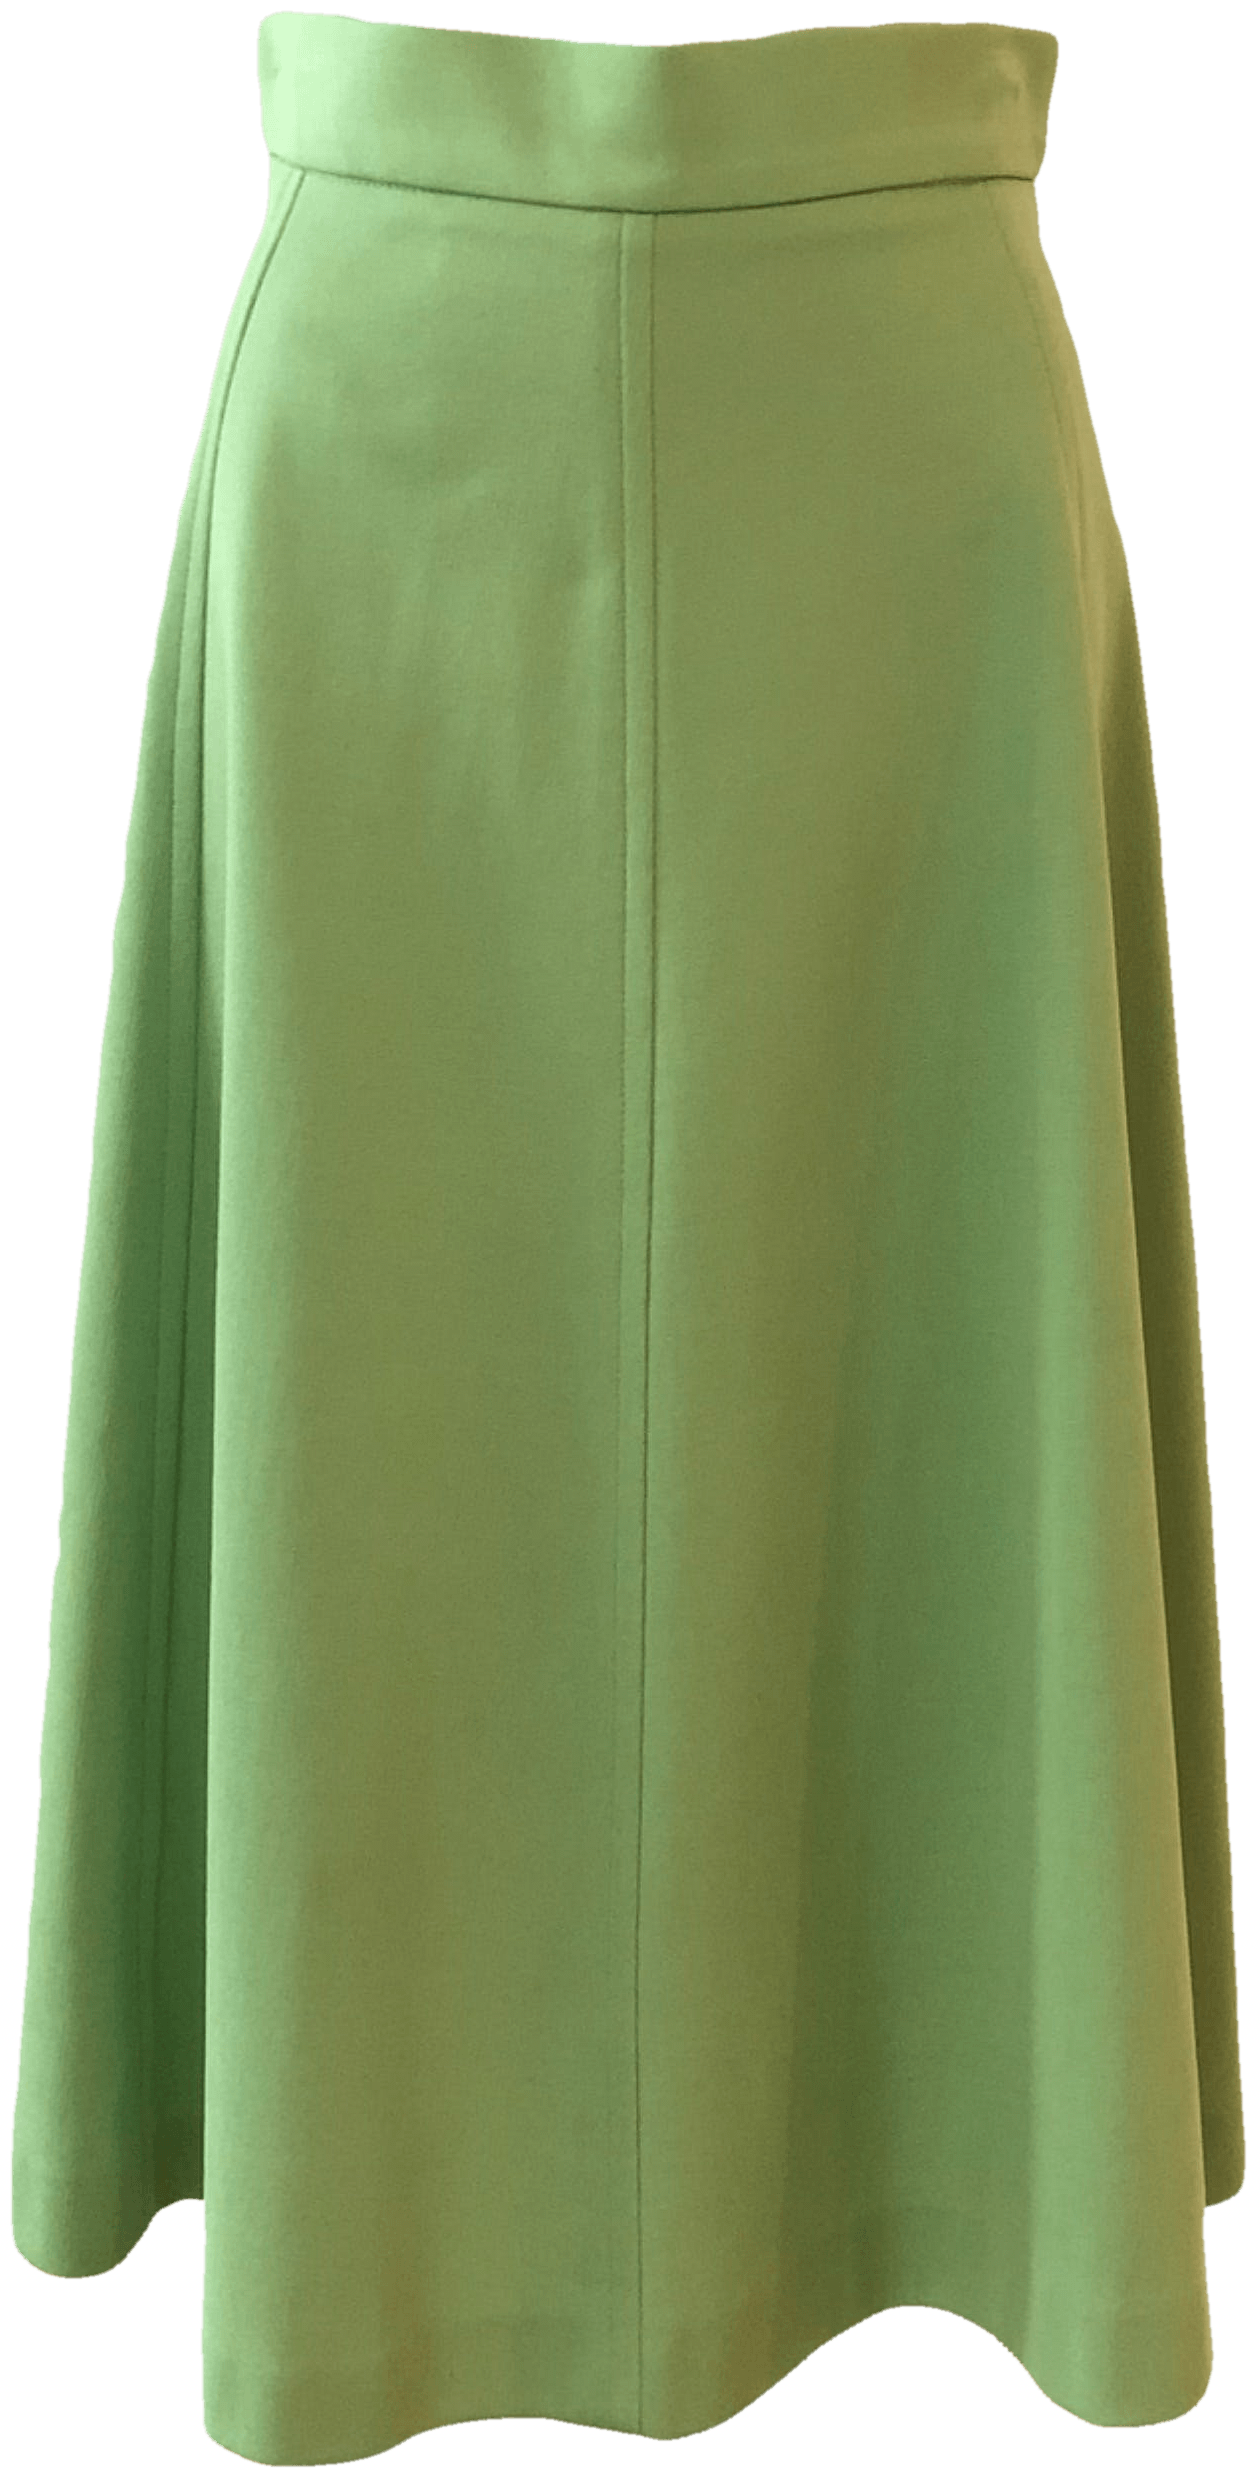 Vintage Light Green Midi Skirt with Stitching Detail by Chateau Du ...